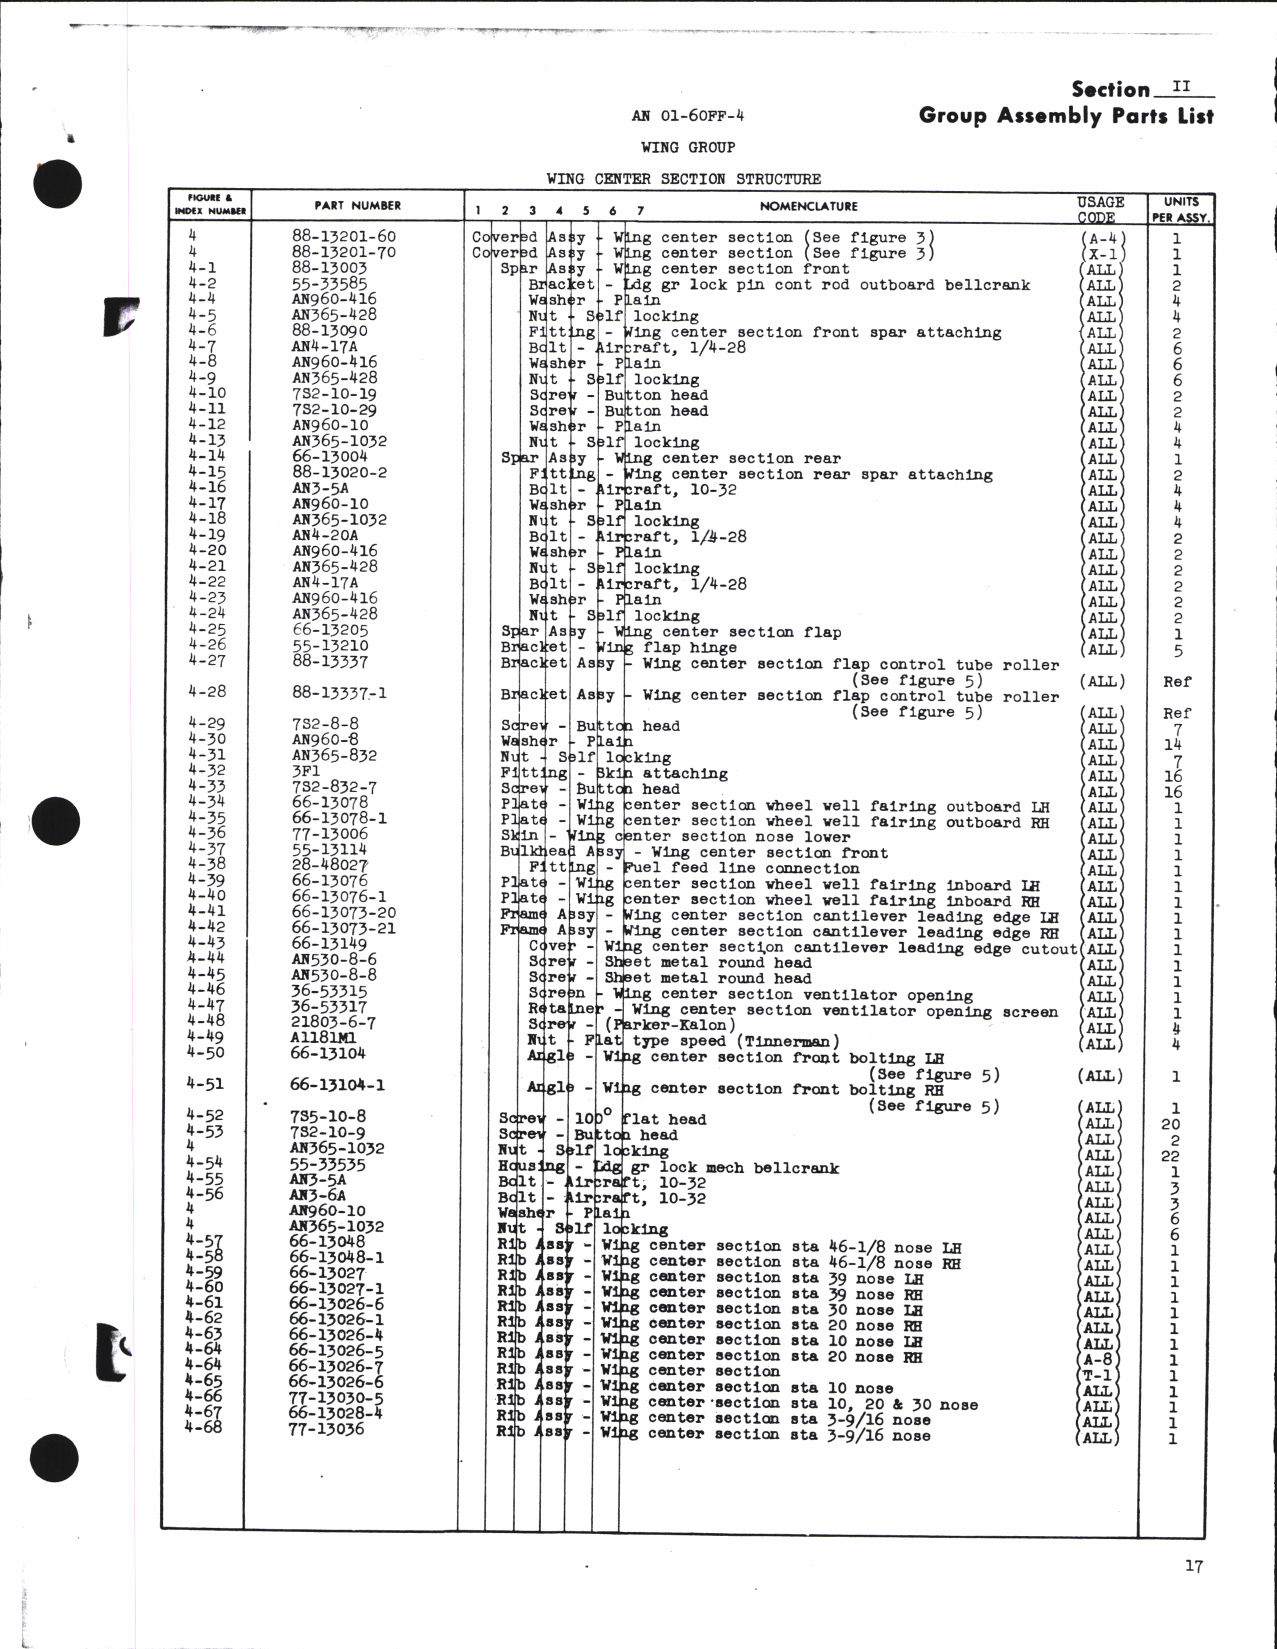 Sample page 4 from AirCorps Library document: Parts Catalog for BT-13A, BT-15, and SNV-1 Models